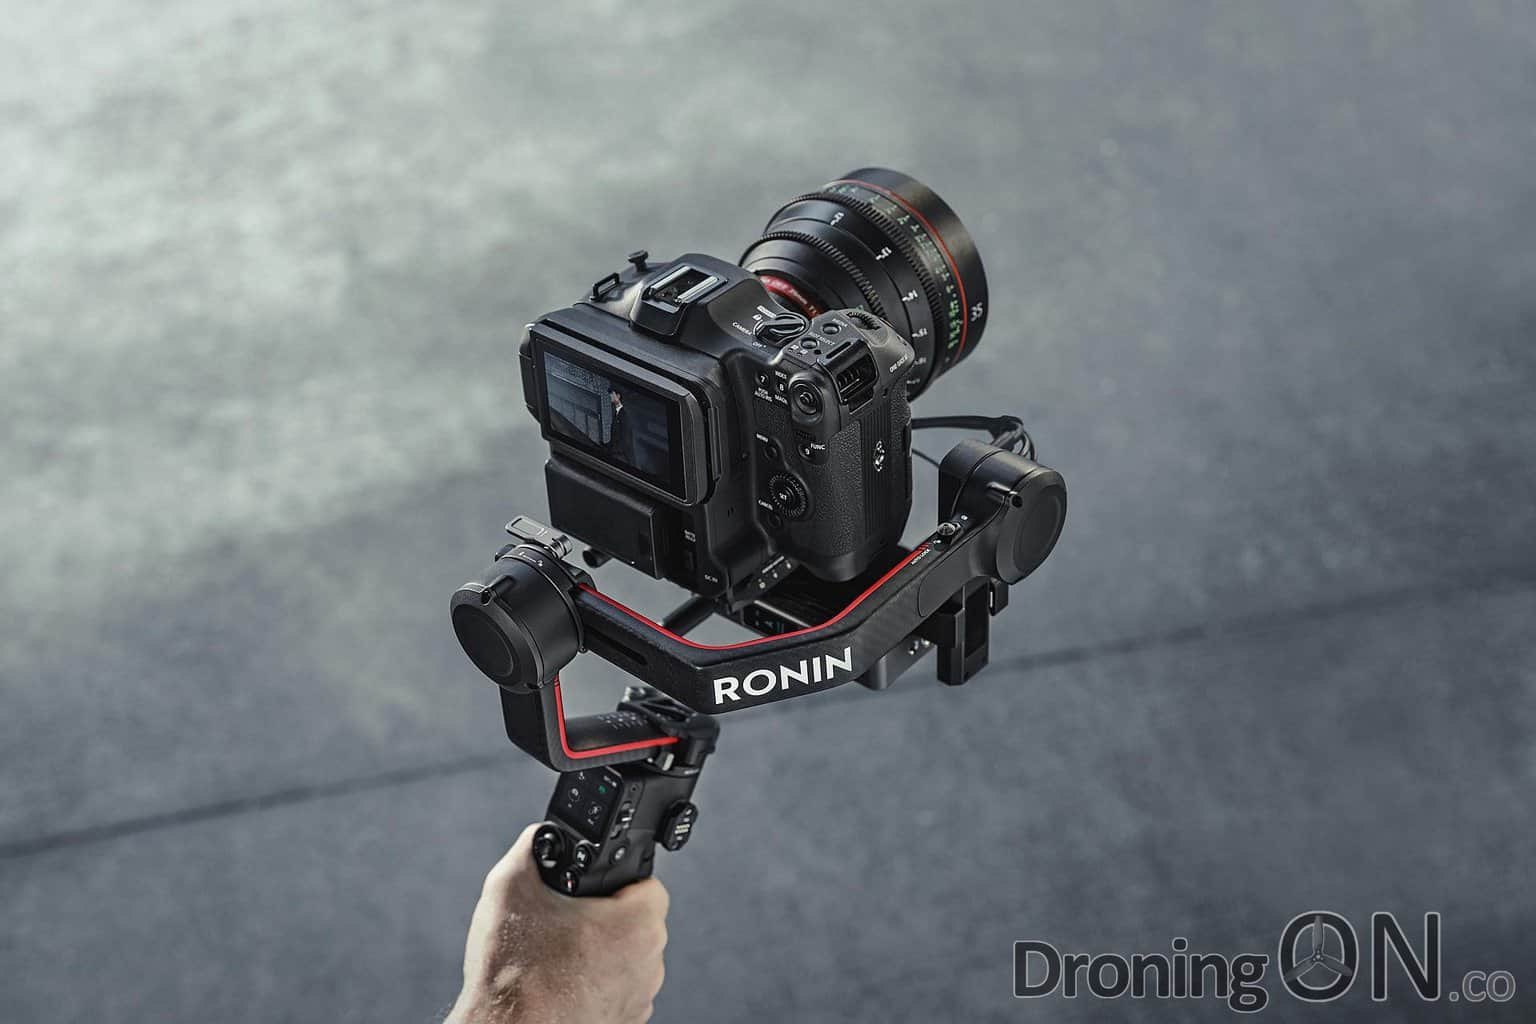 New DJI RS 3 Pro worth from launched DroningON RS - - Is upgrading 2? it DJI